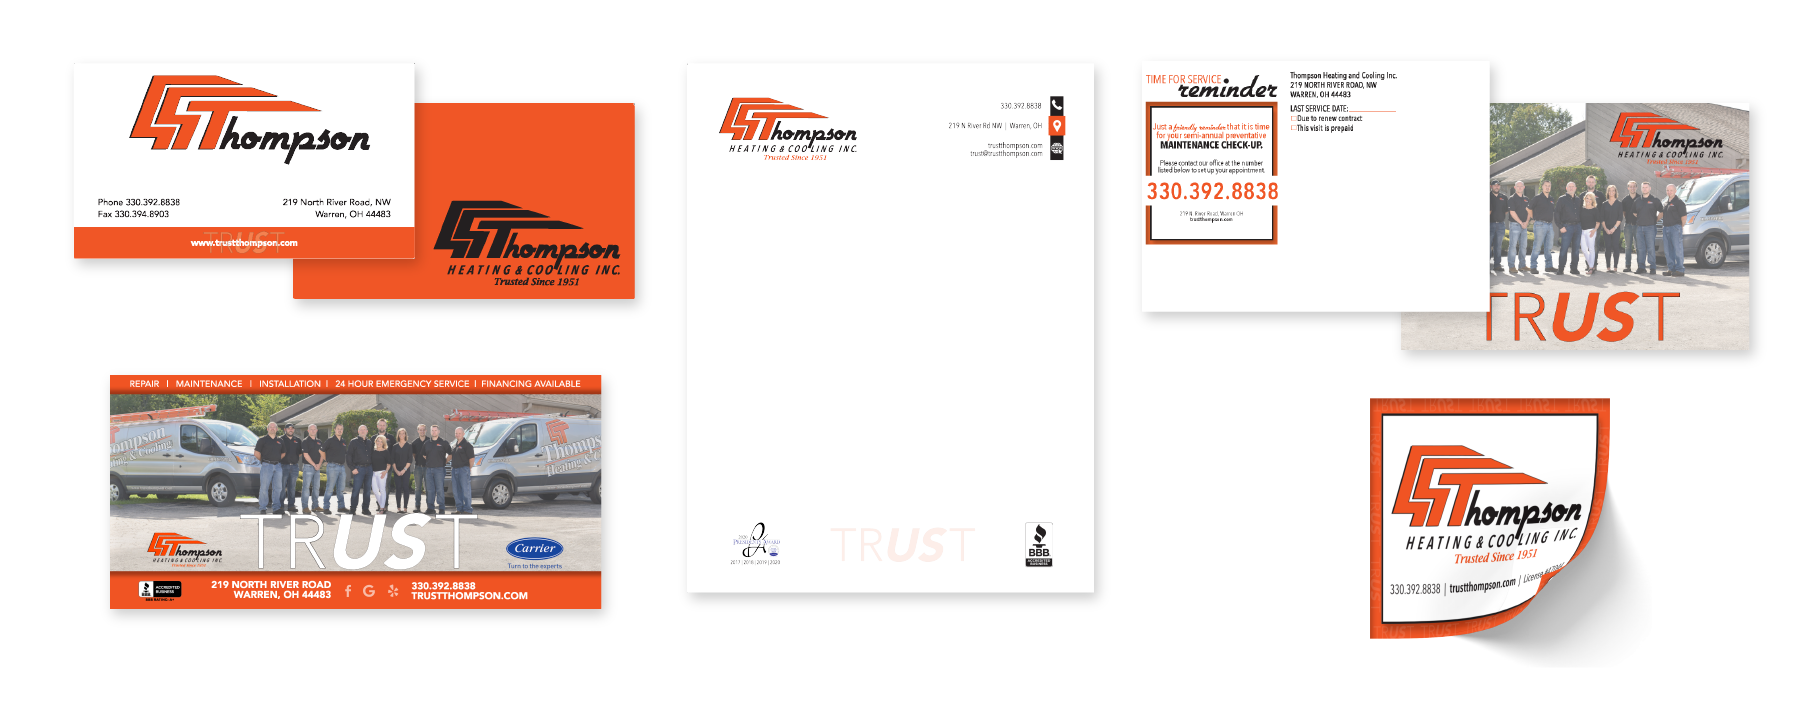 Trust Thompson Promotional Materials such as business cards and paper documents